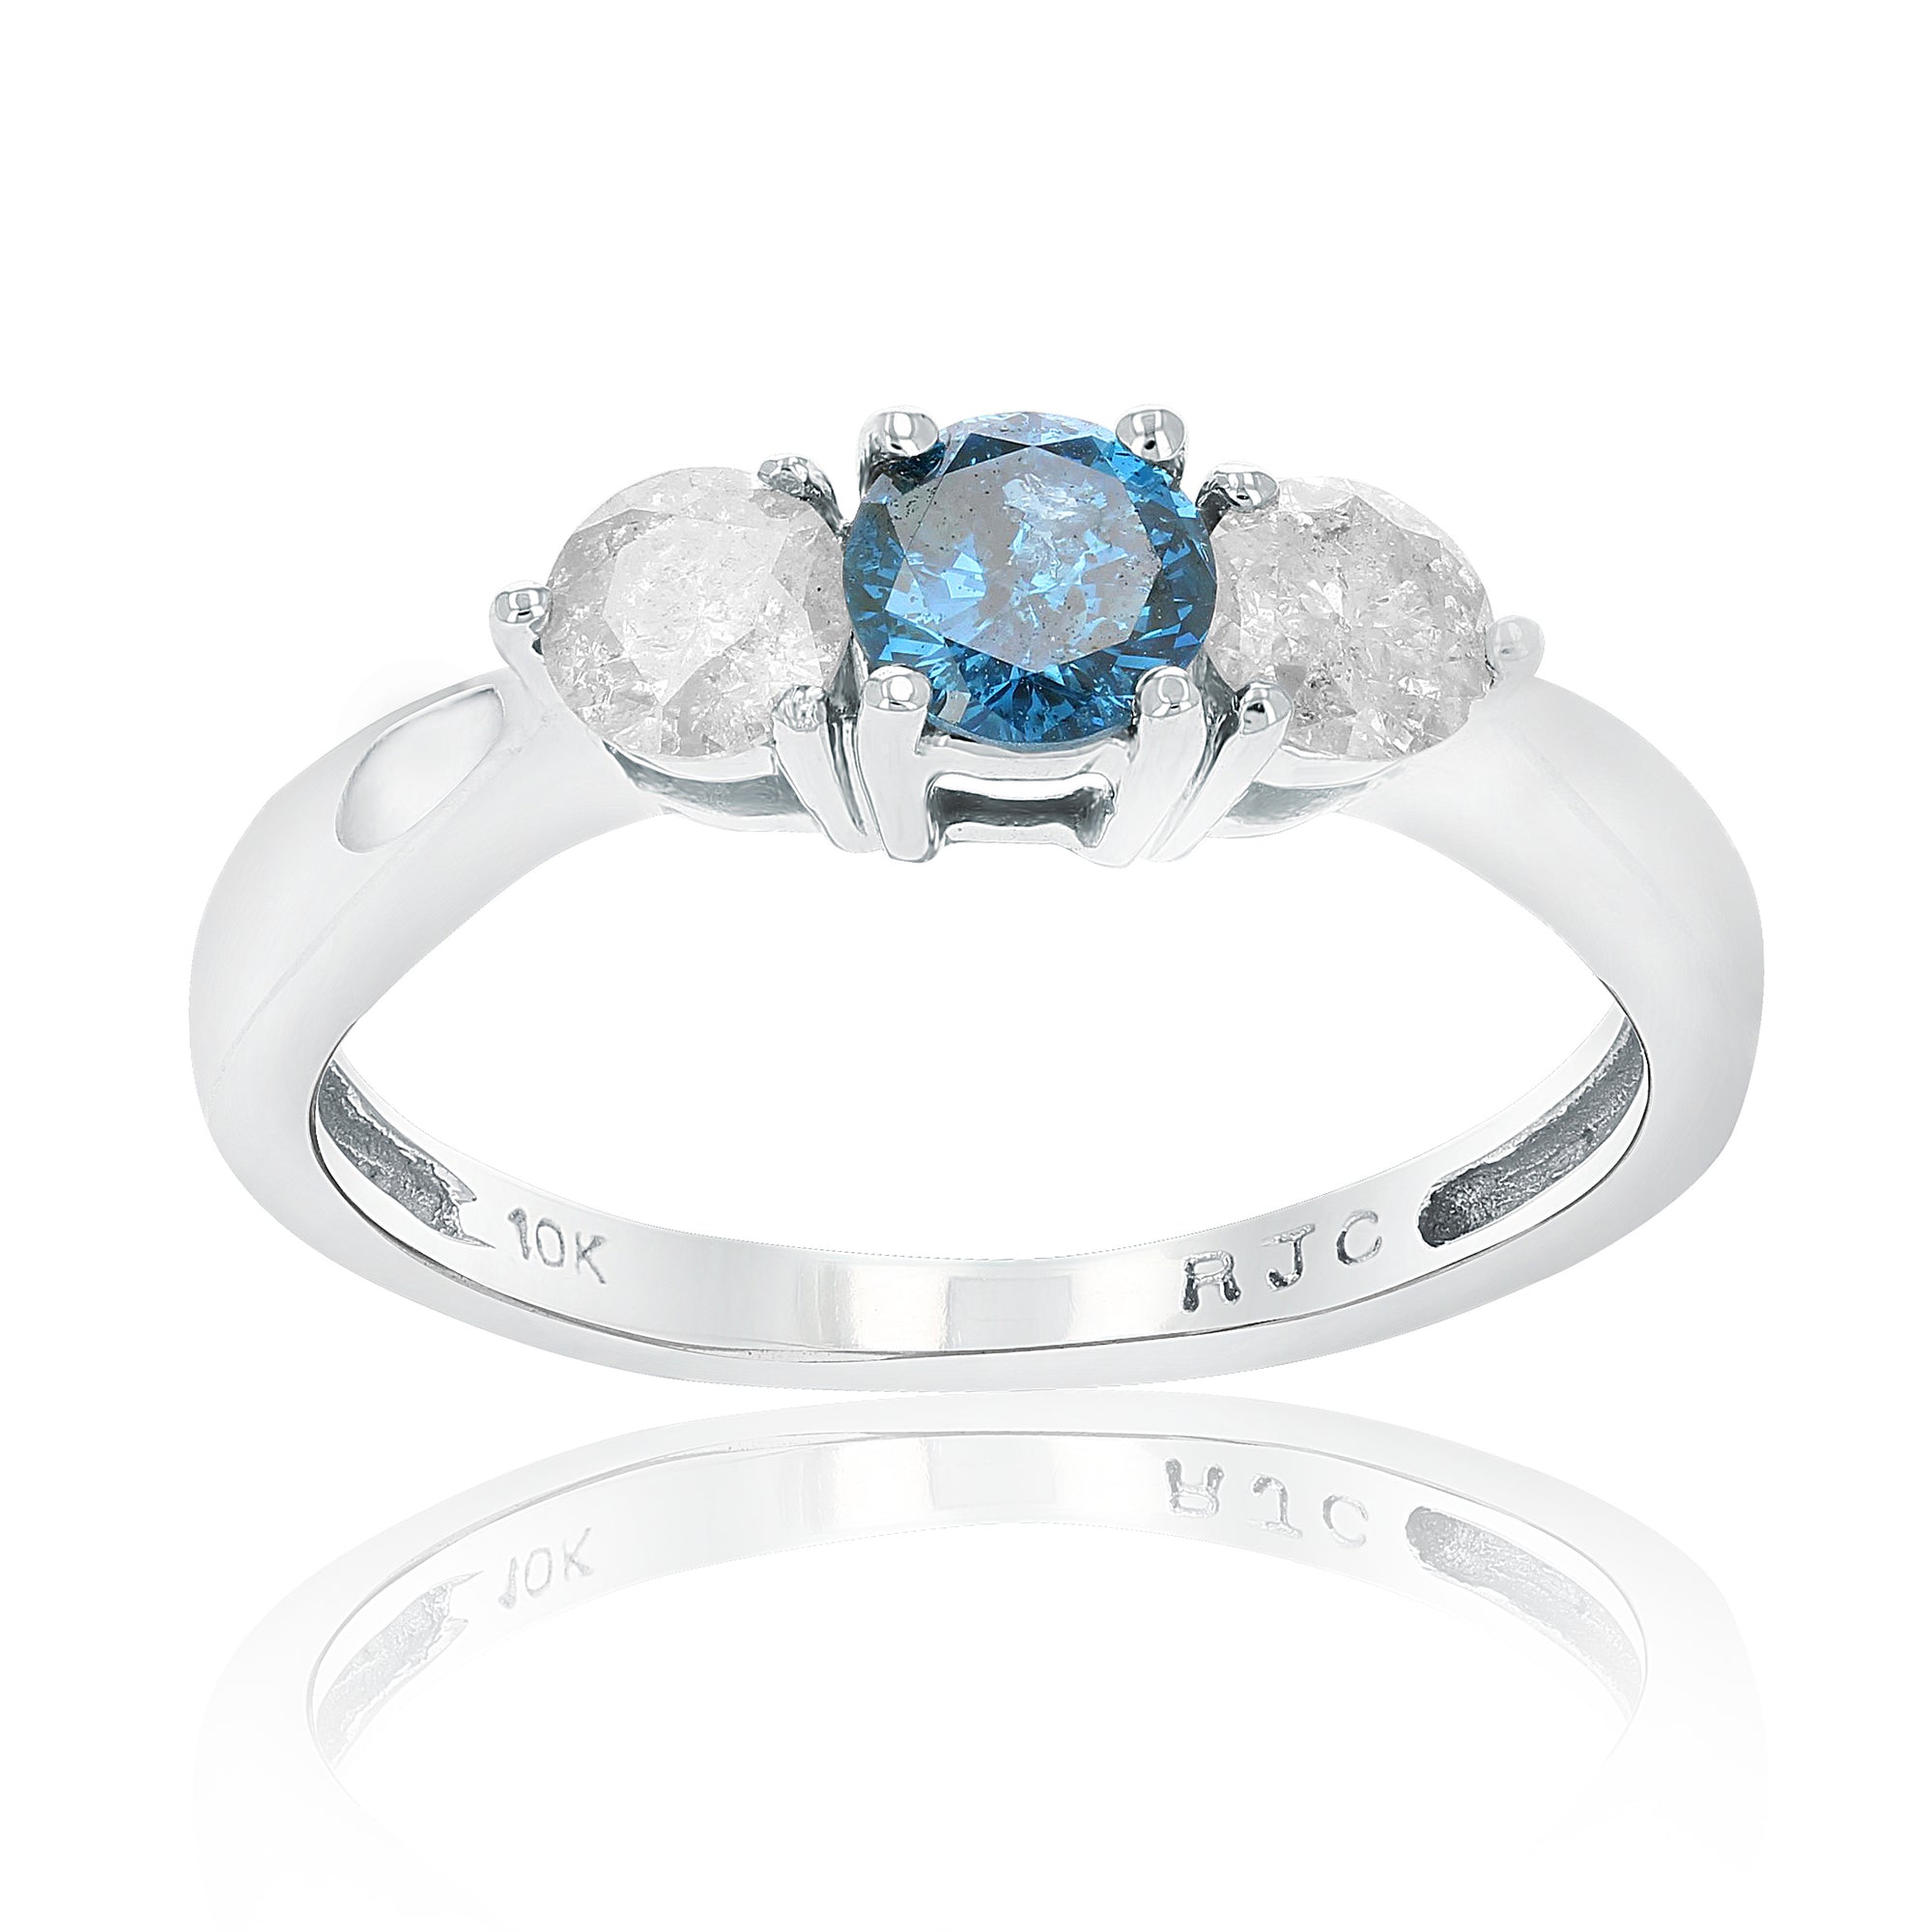 1 cttw 3 Stone Blue and White Diamond Engagement Ring in 10K White Gold Size 7